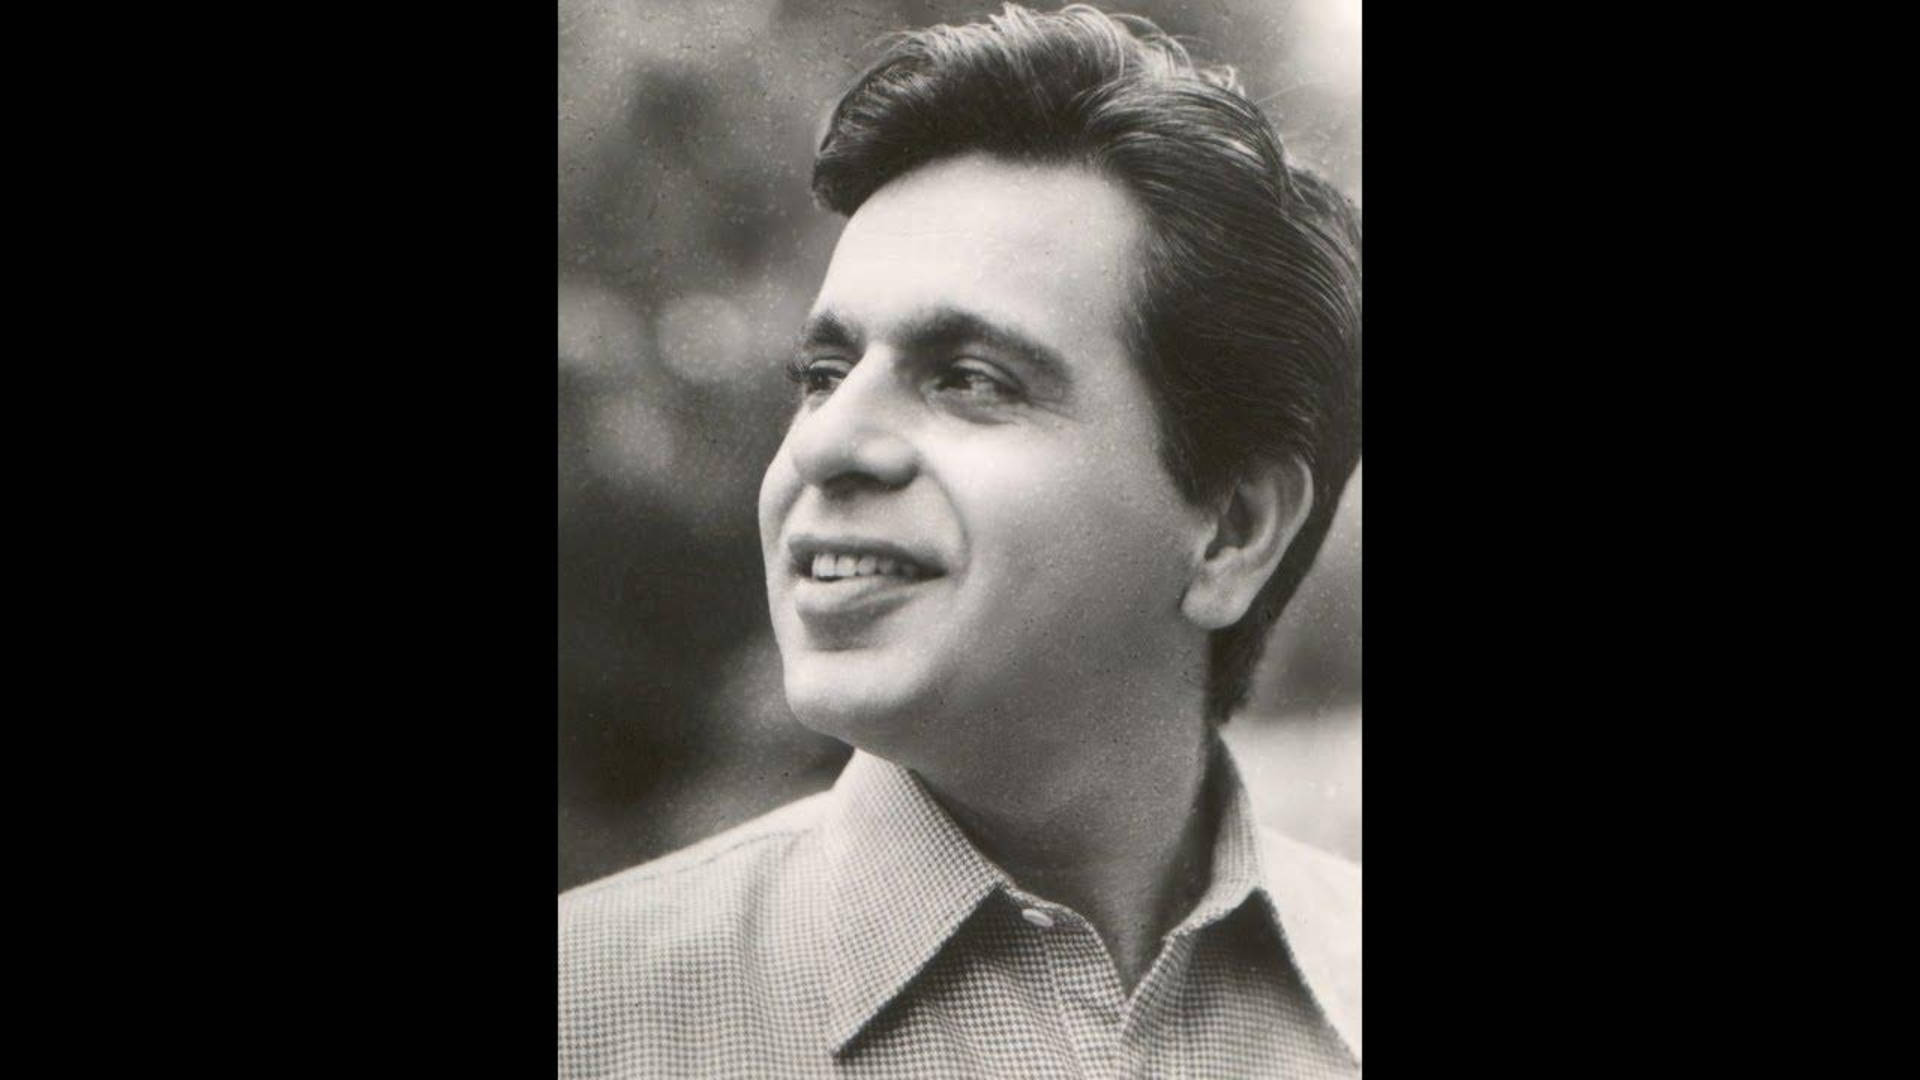 Young Dilip Kumar In Sepia Tone Background